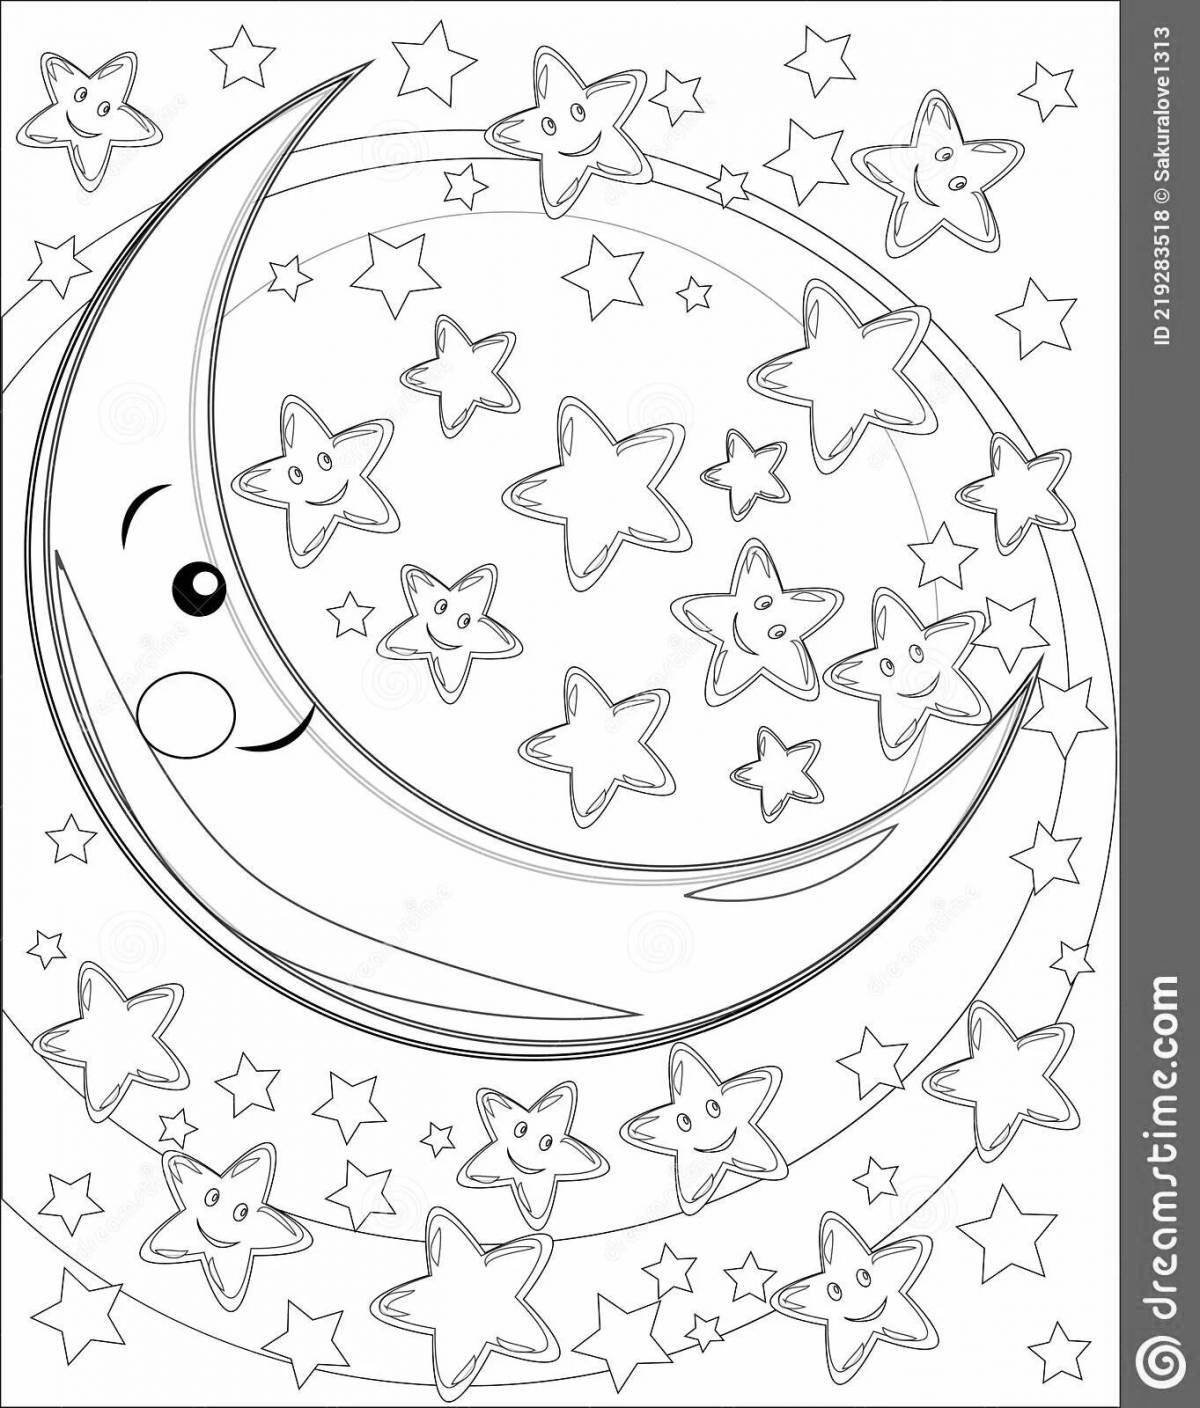 Coloring page wonderful night sky